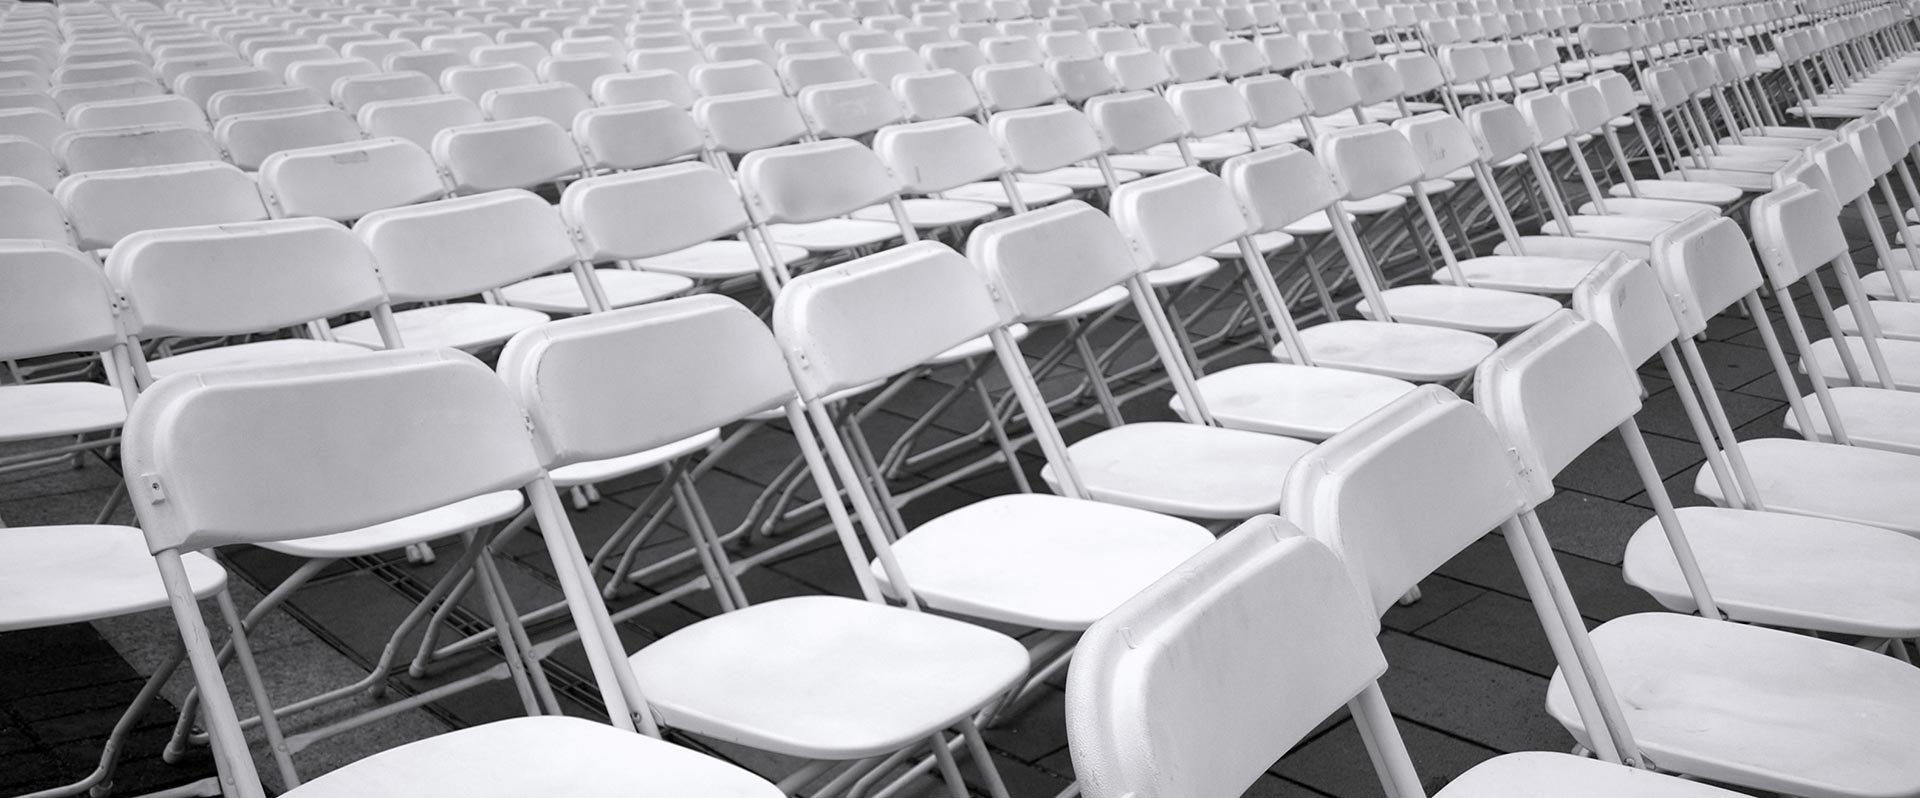 Hiring-The-Right-Chairs-For-Your-Event-Seating-Options